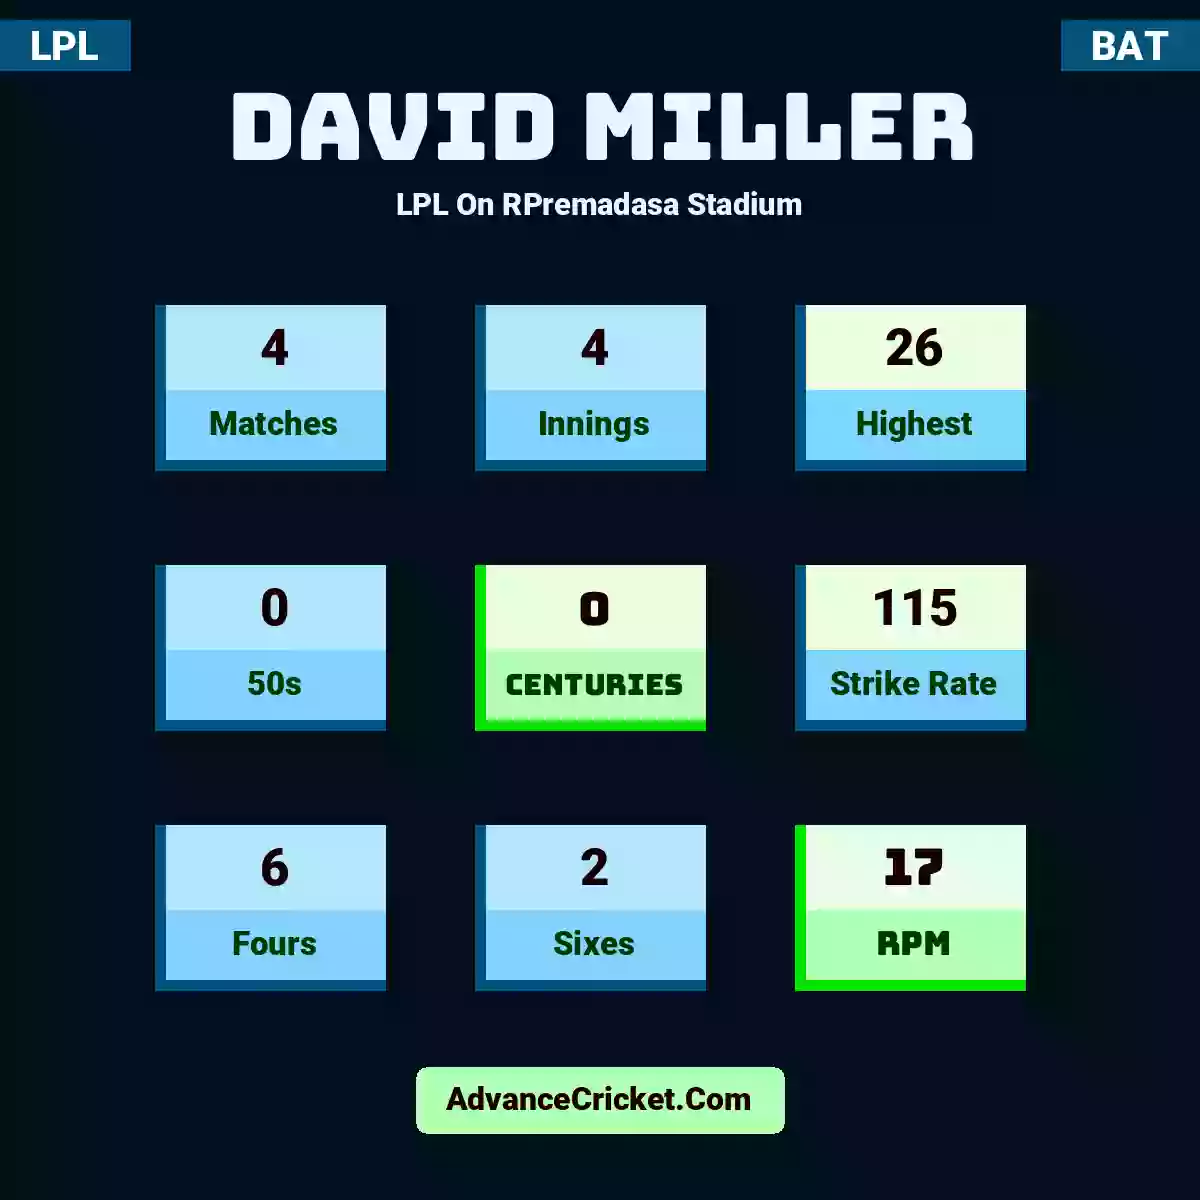 David Miller LPL  On RPremadasa Stadium, David Miller played 4 matches, scored 26 runs as highest, 0 half-centuries, and 0 centuries, with a strike rate of 115. D.Miller hit 6 fours and 2 sixes, with an RPM of 17.